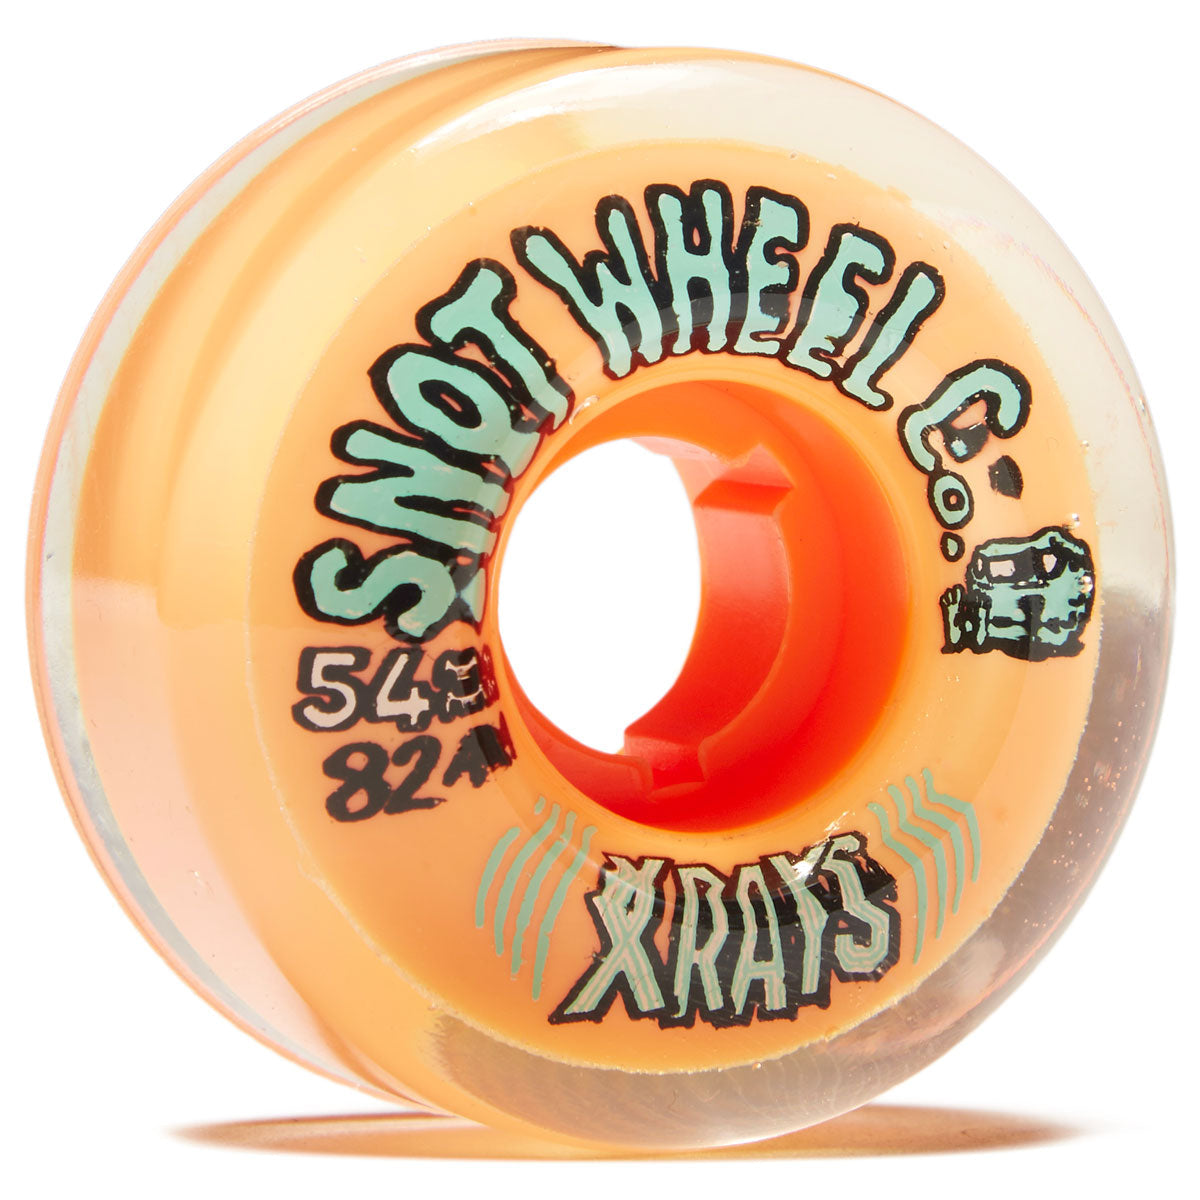 SNOT X-RAYS 54MM 82A ORANGE/CLEAR